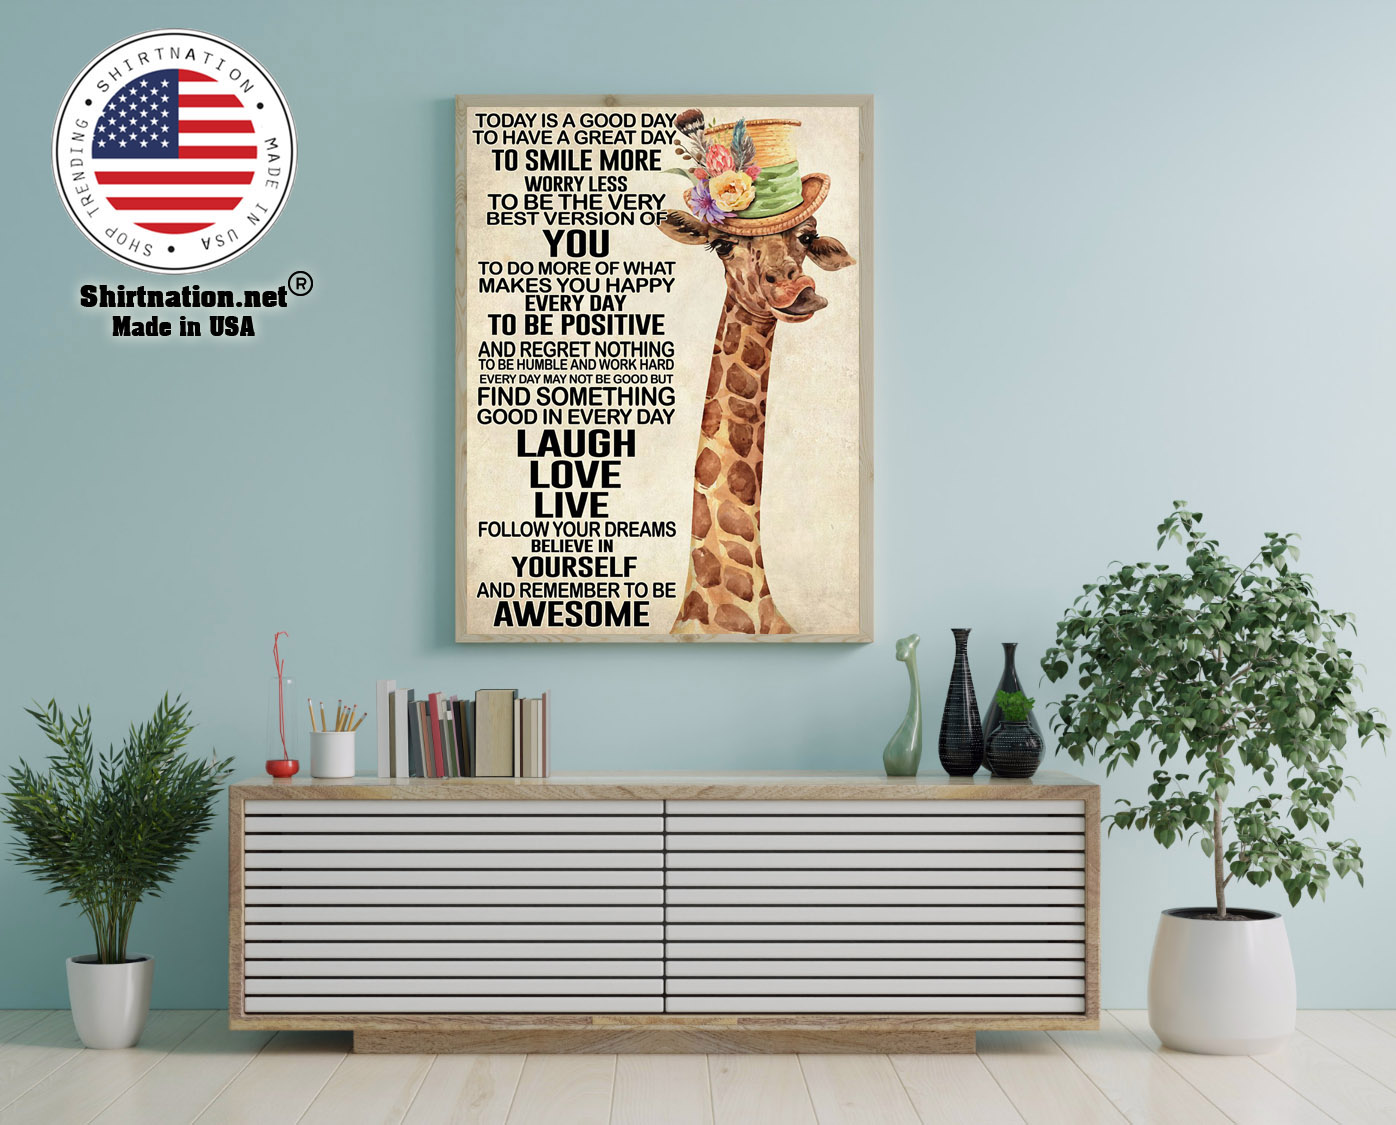 Giraffe today is a good day to have a great day poster 12